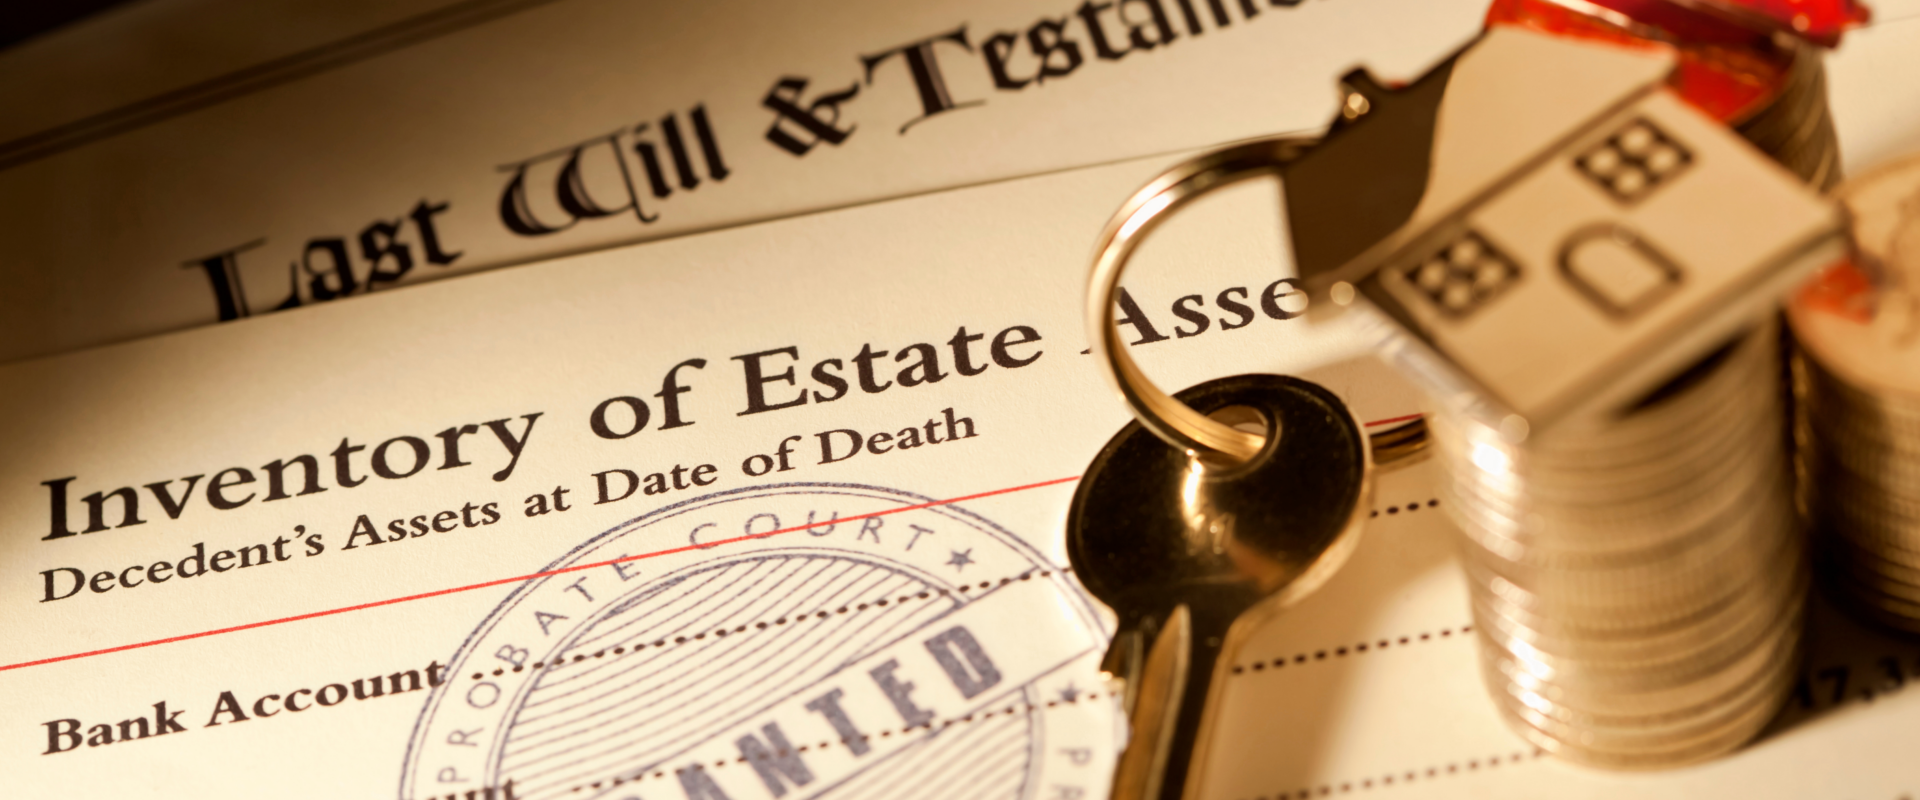 How Can an Executor Sell A House Without Probate?